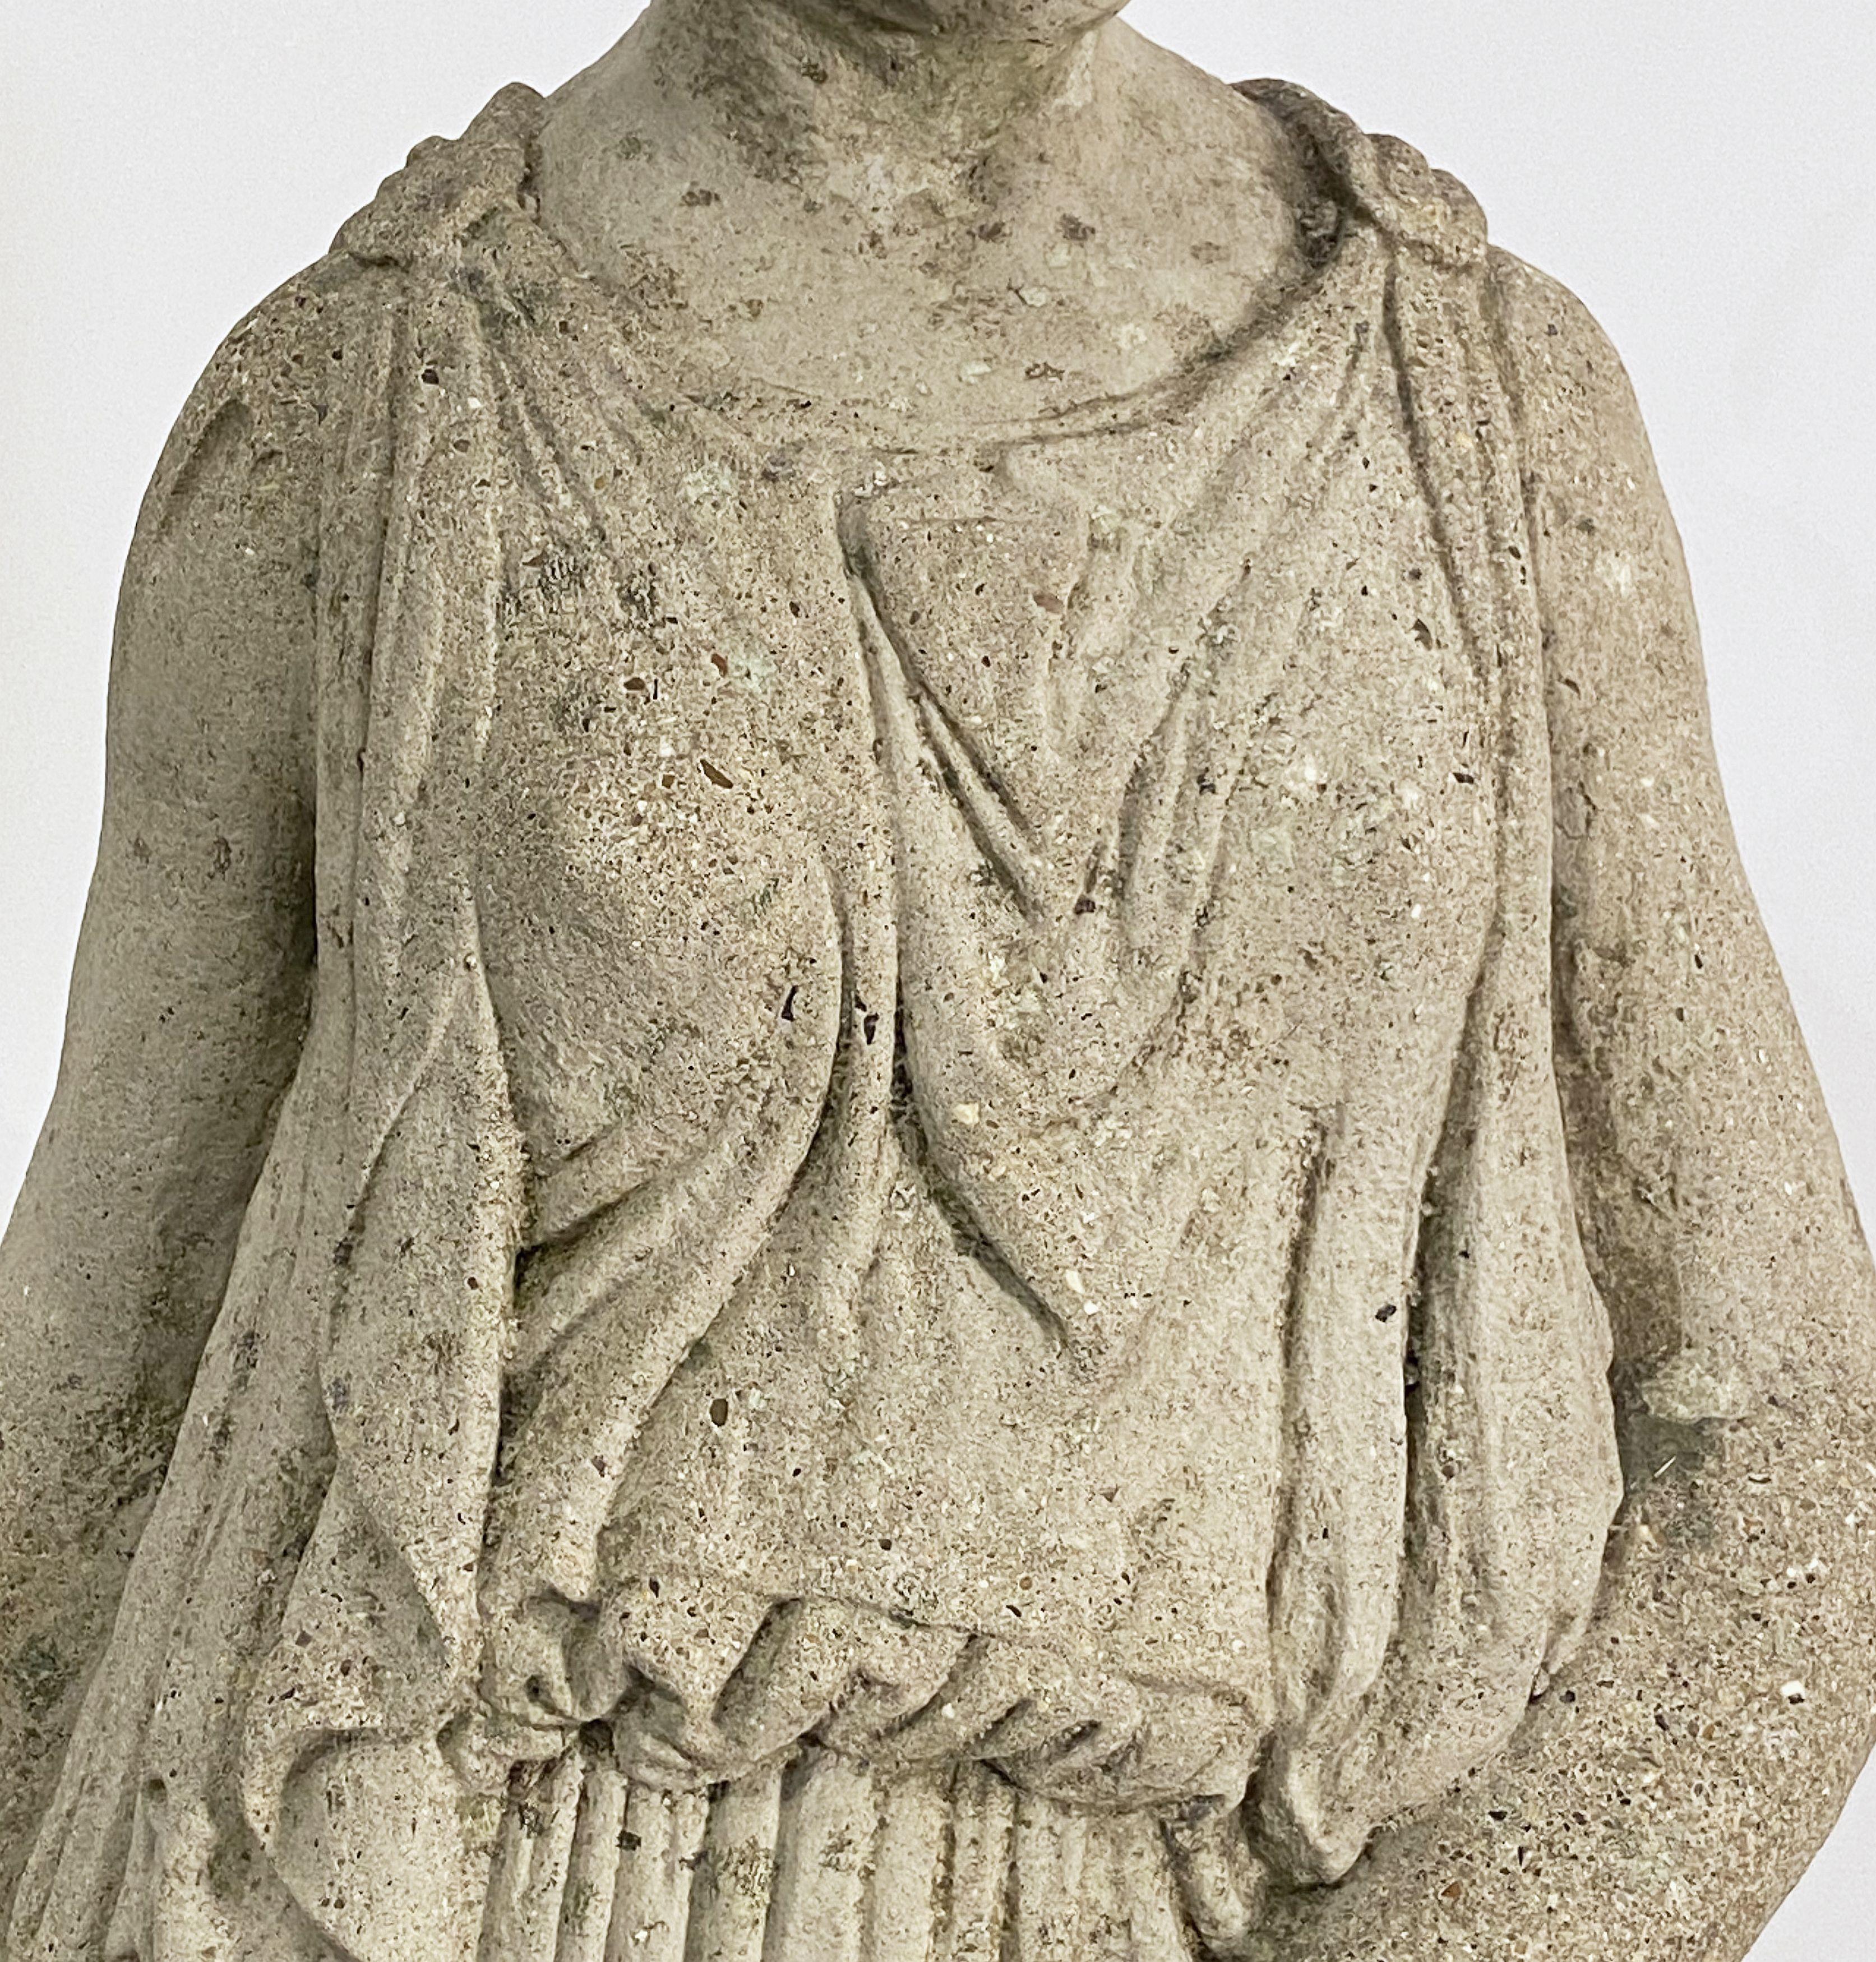 Classical Greek Large English Garden Stone Statue of a Maiden on Column Pedestal (H 59 1/4)